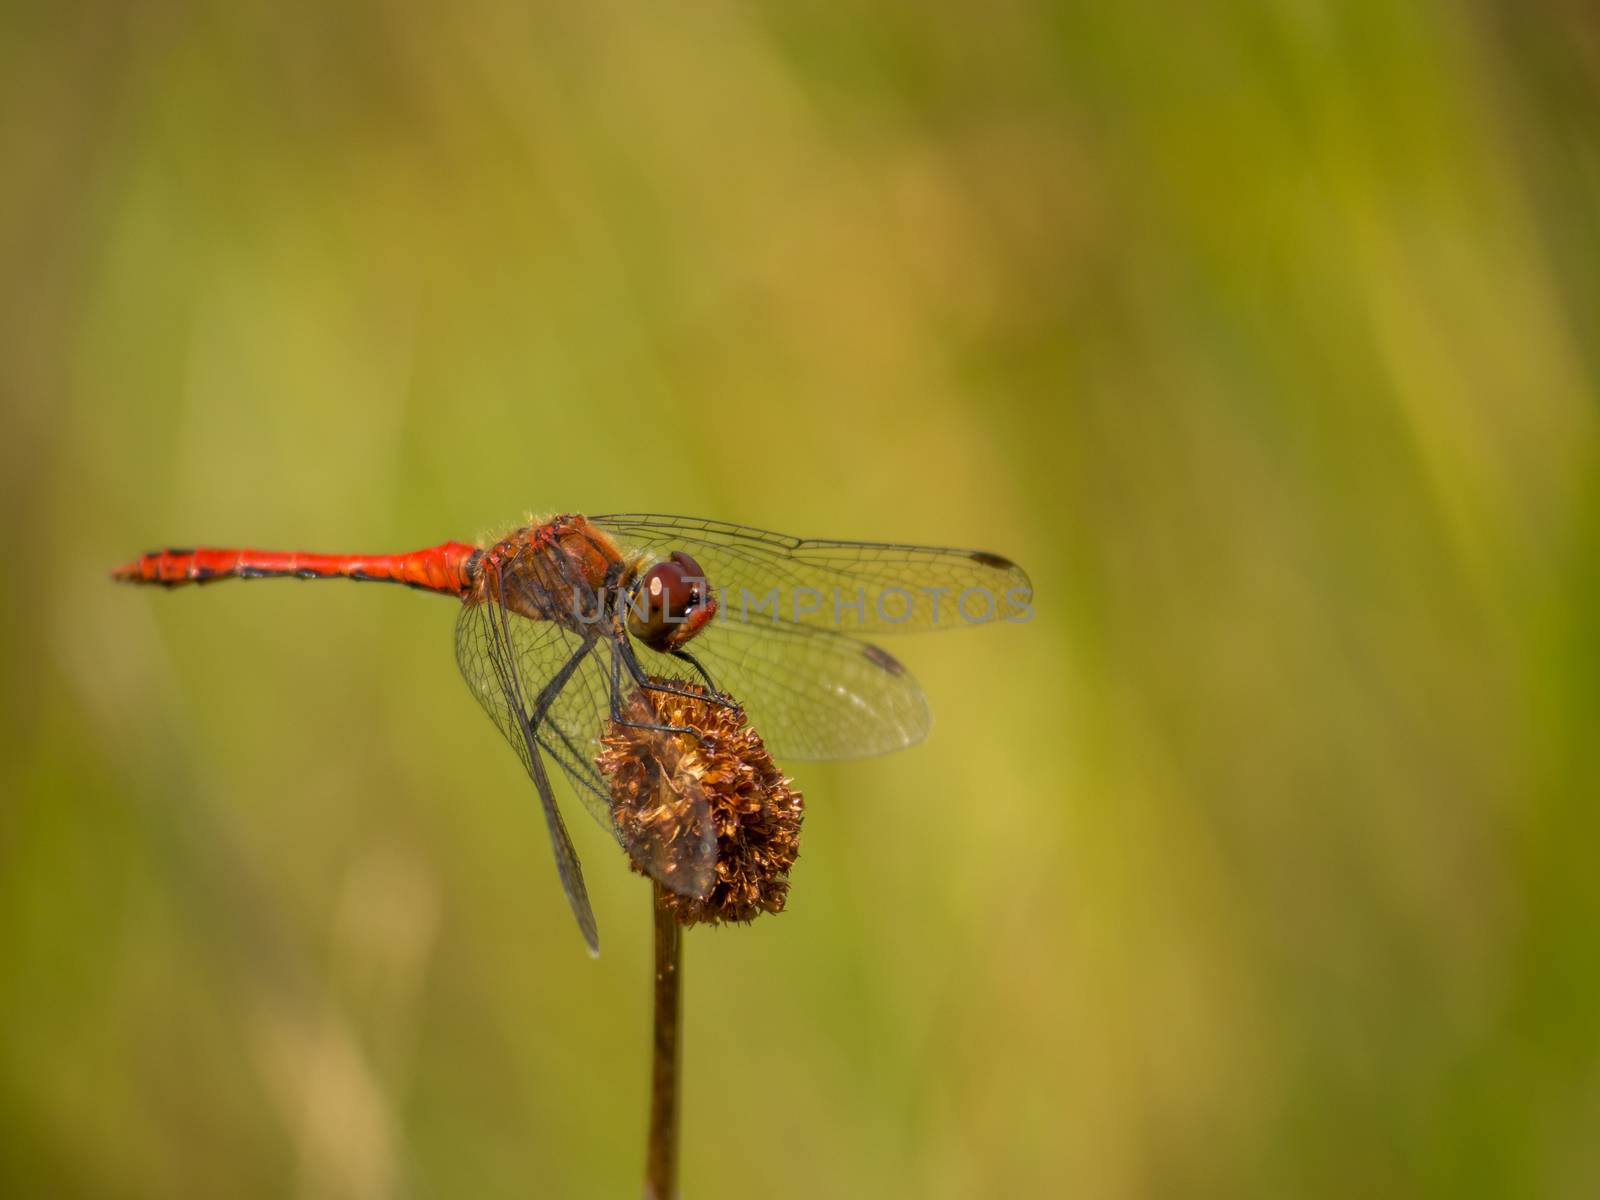 Vibrant red dragonfly resting on a brown grass porch